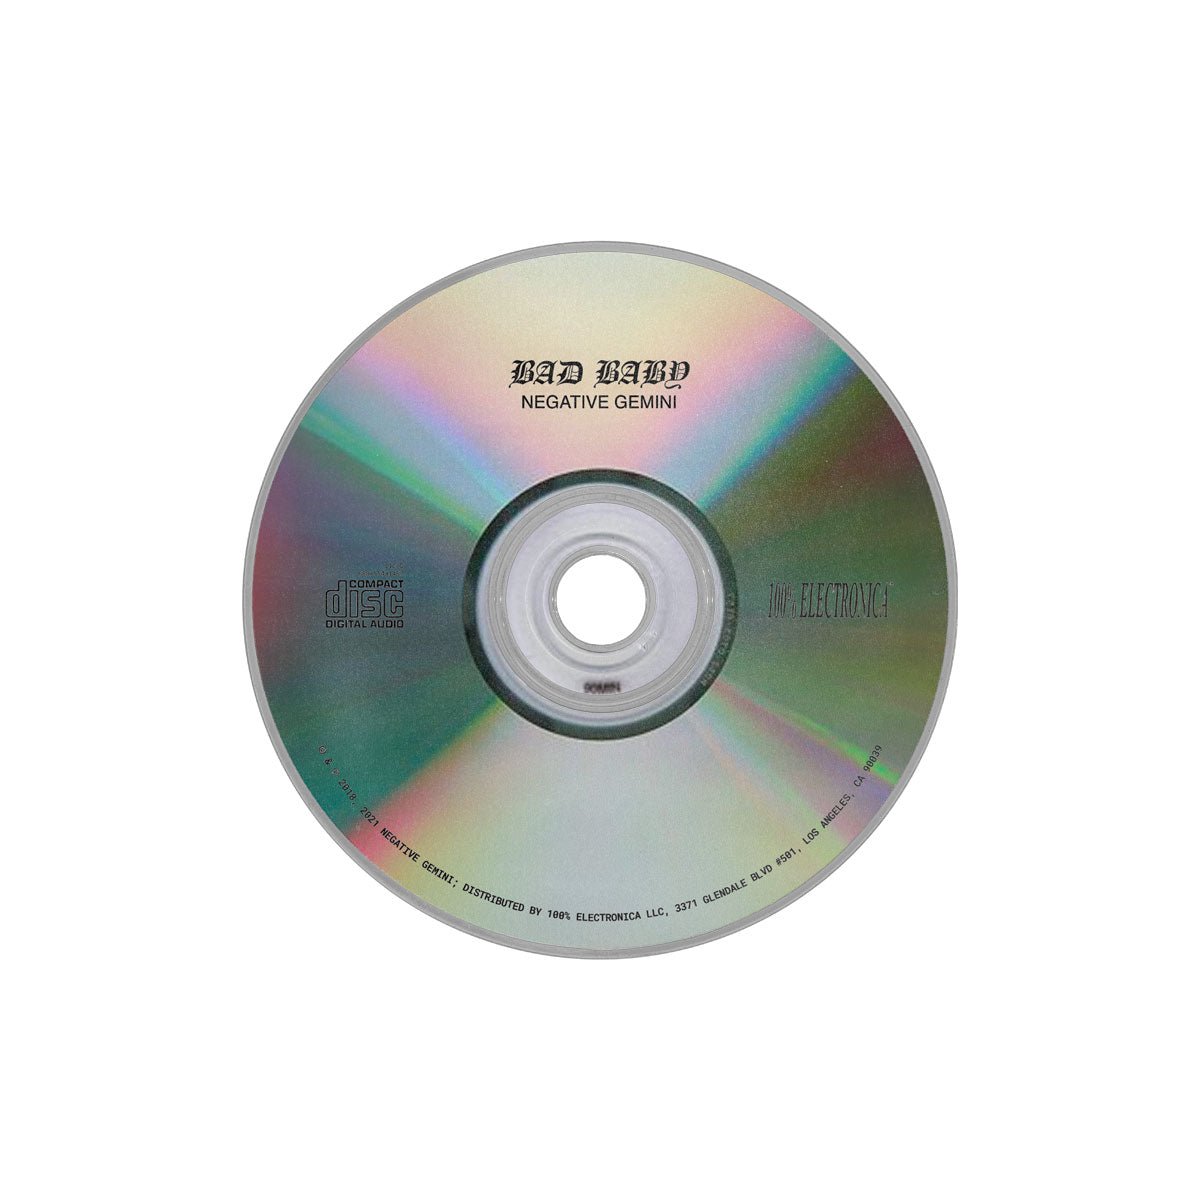 Neggy Gemmy - Bad Baby CD - 100% Electronica Official Store (Photo 2)